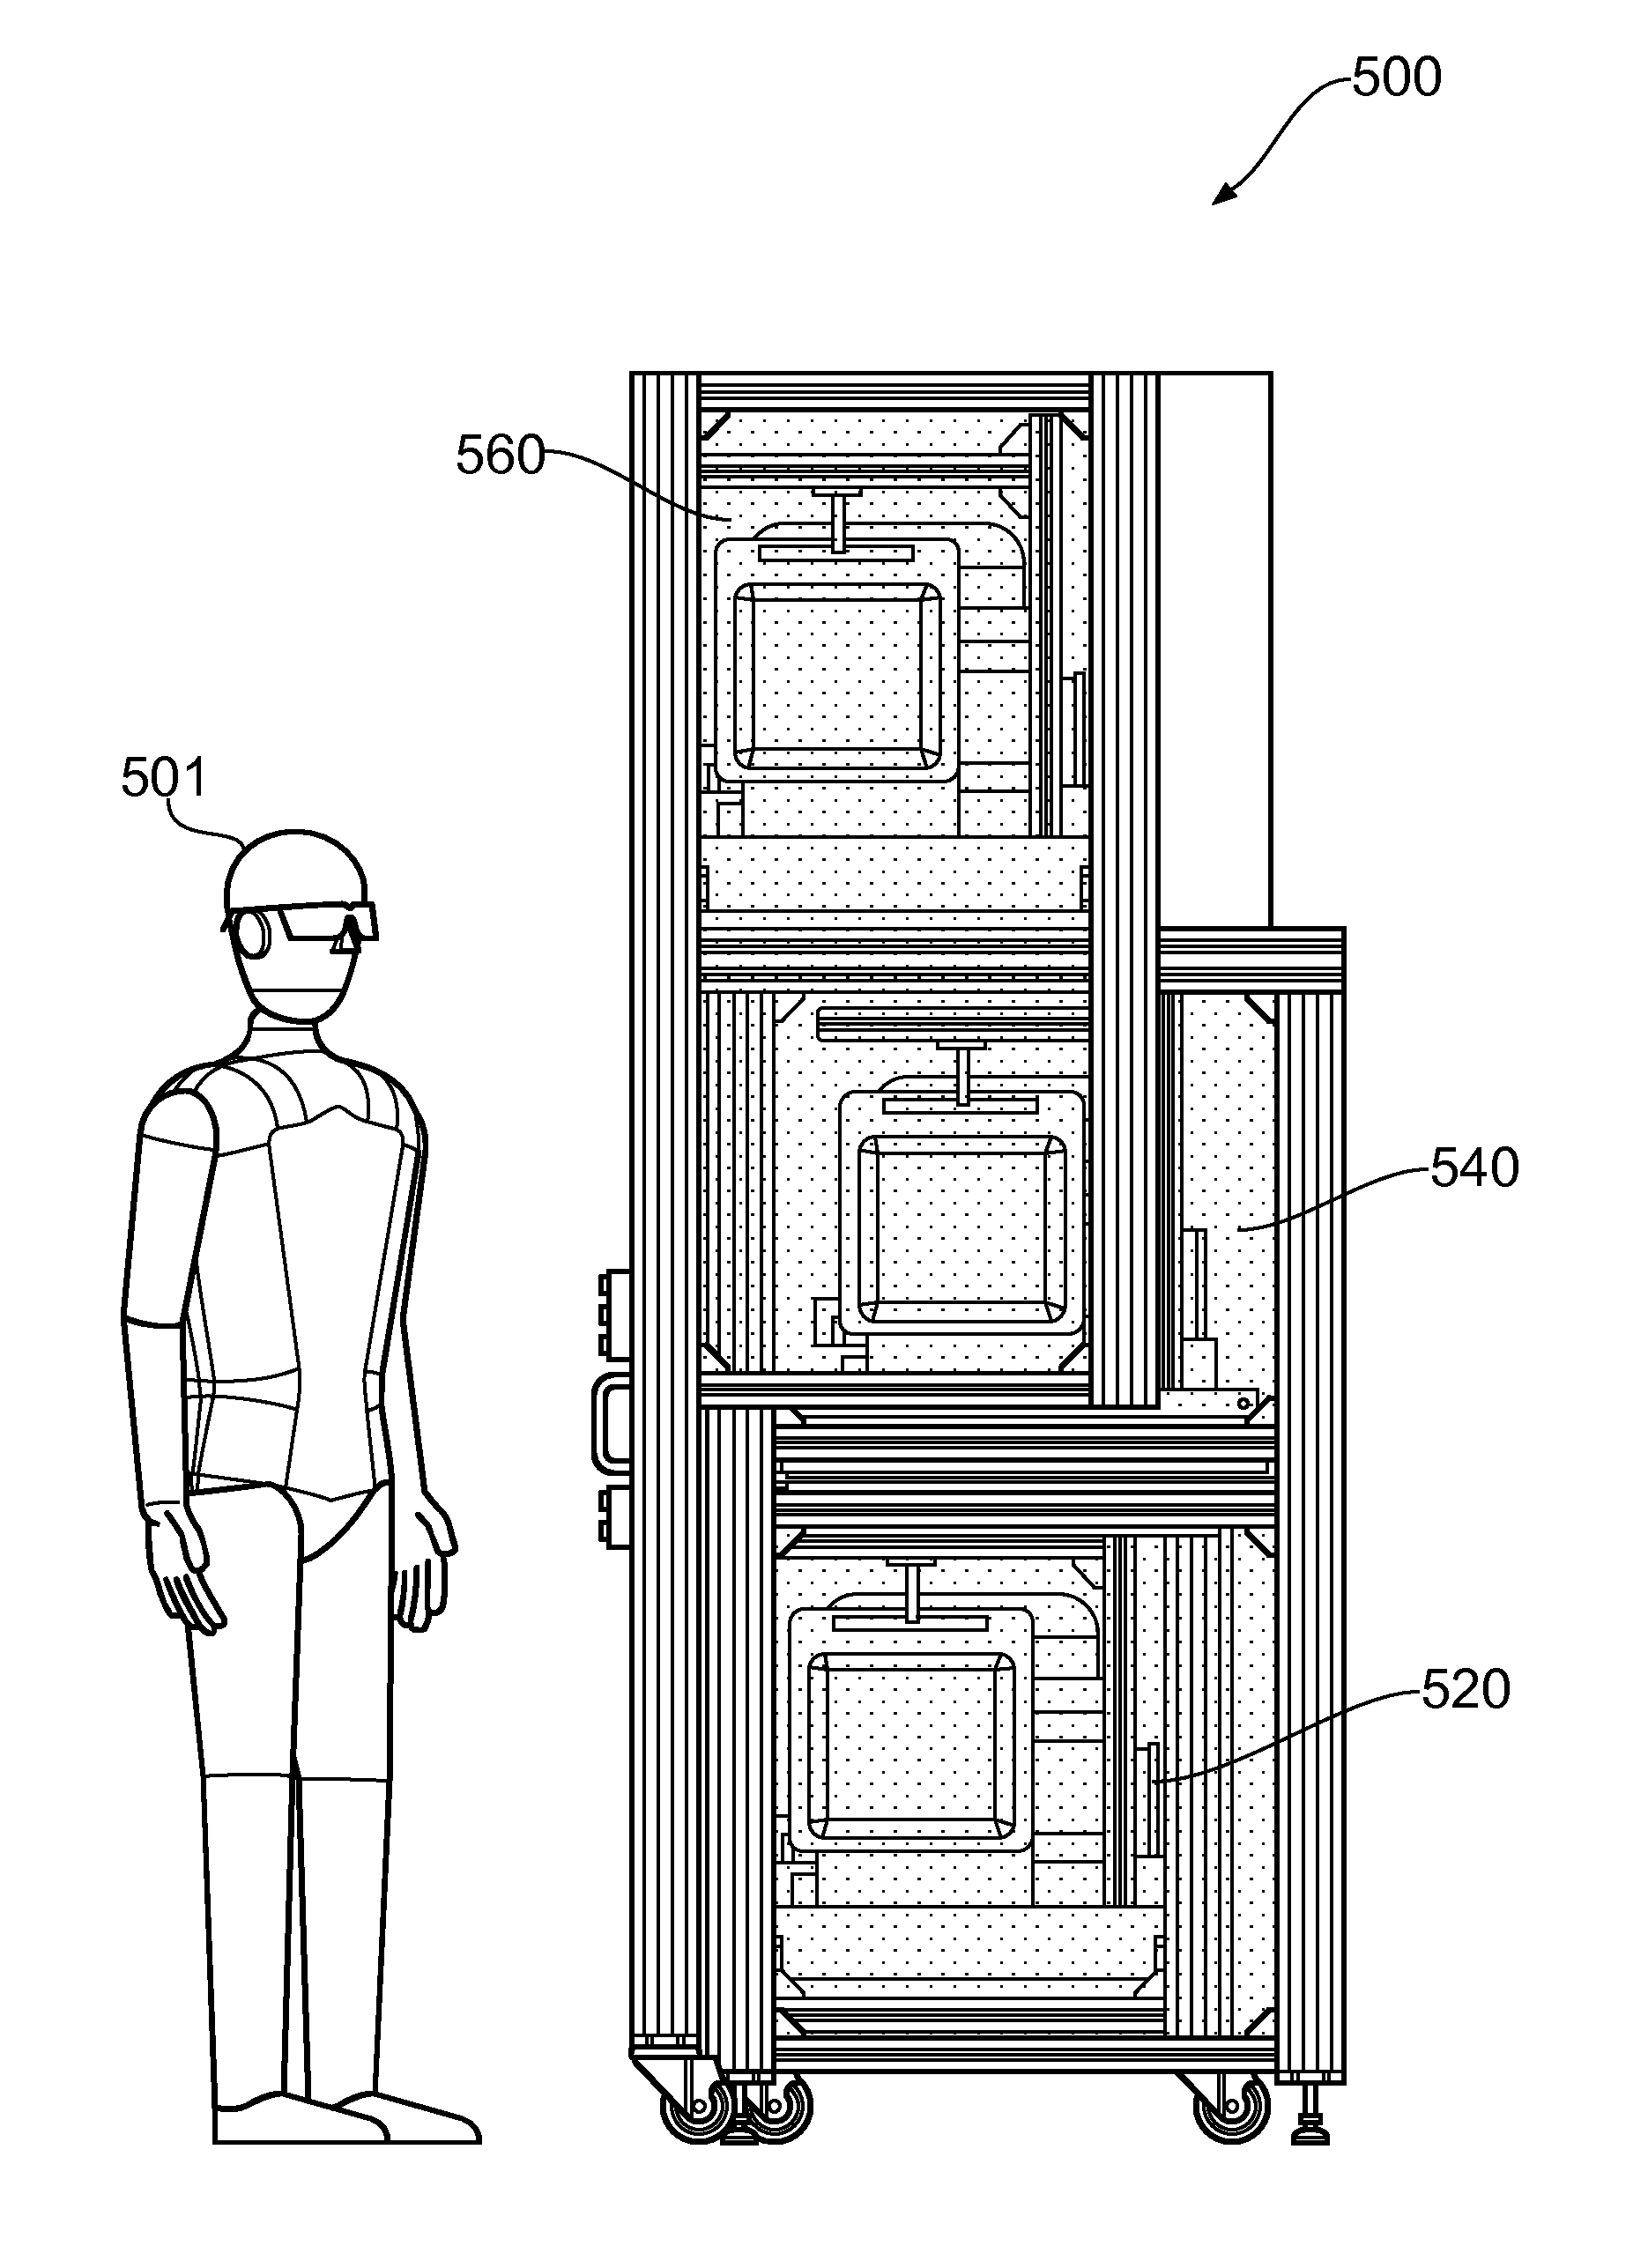 Cell culturing and/or biomanufacturing system